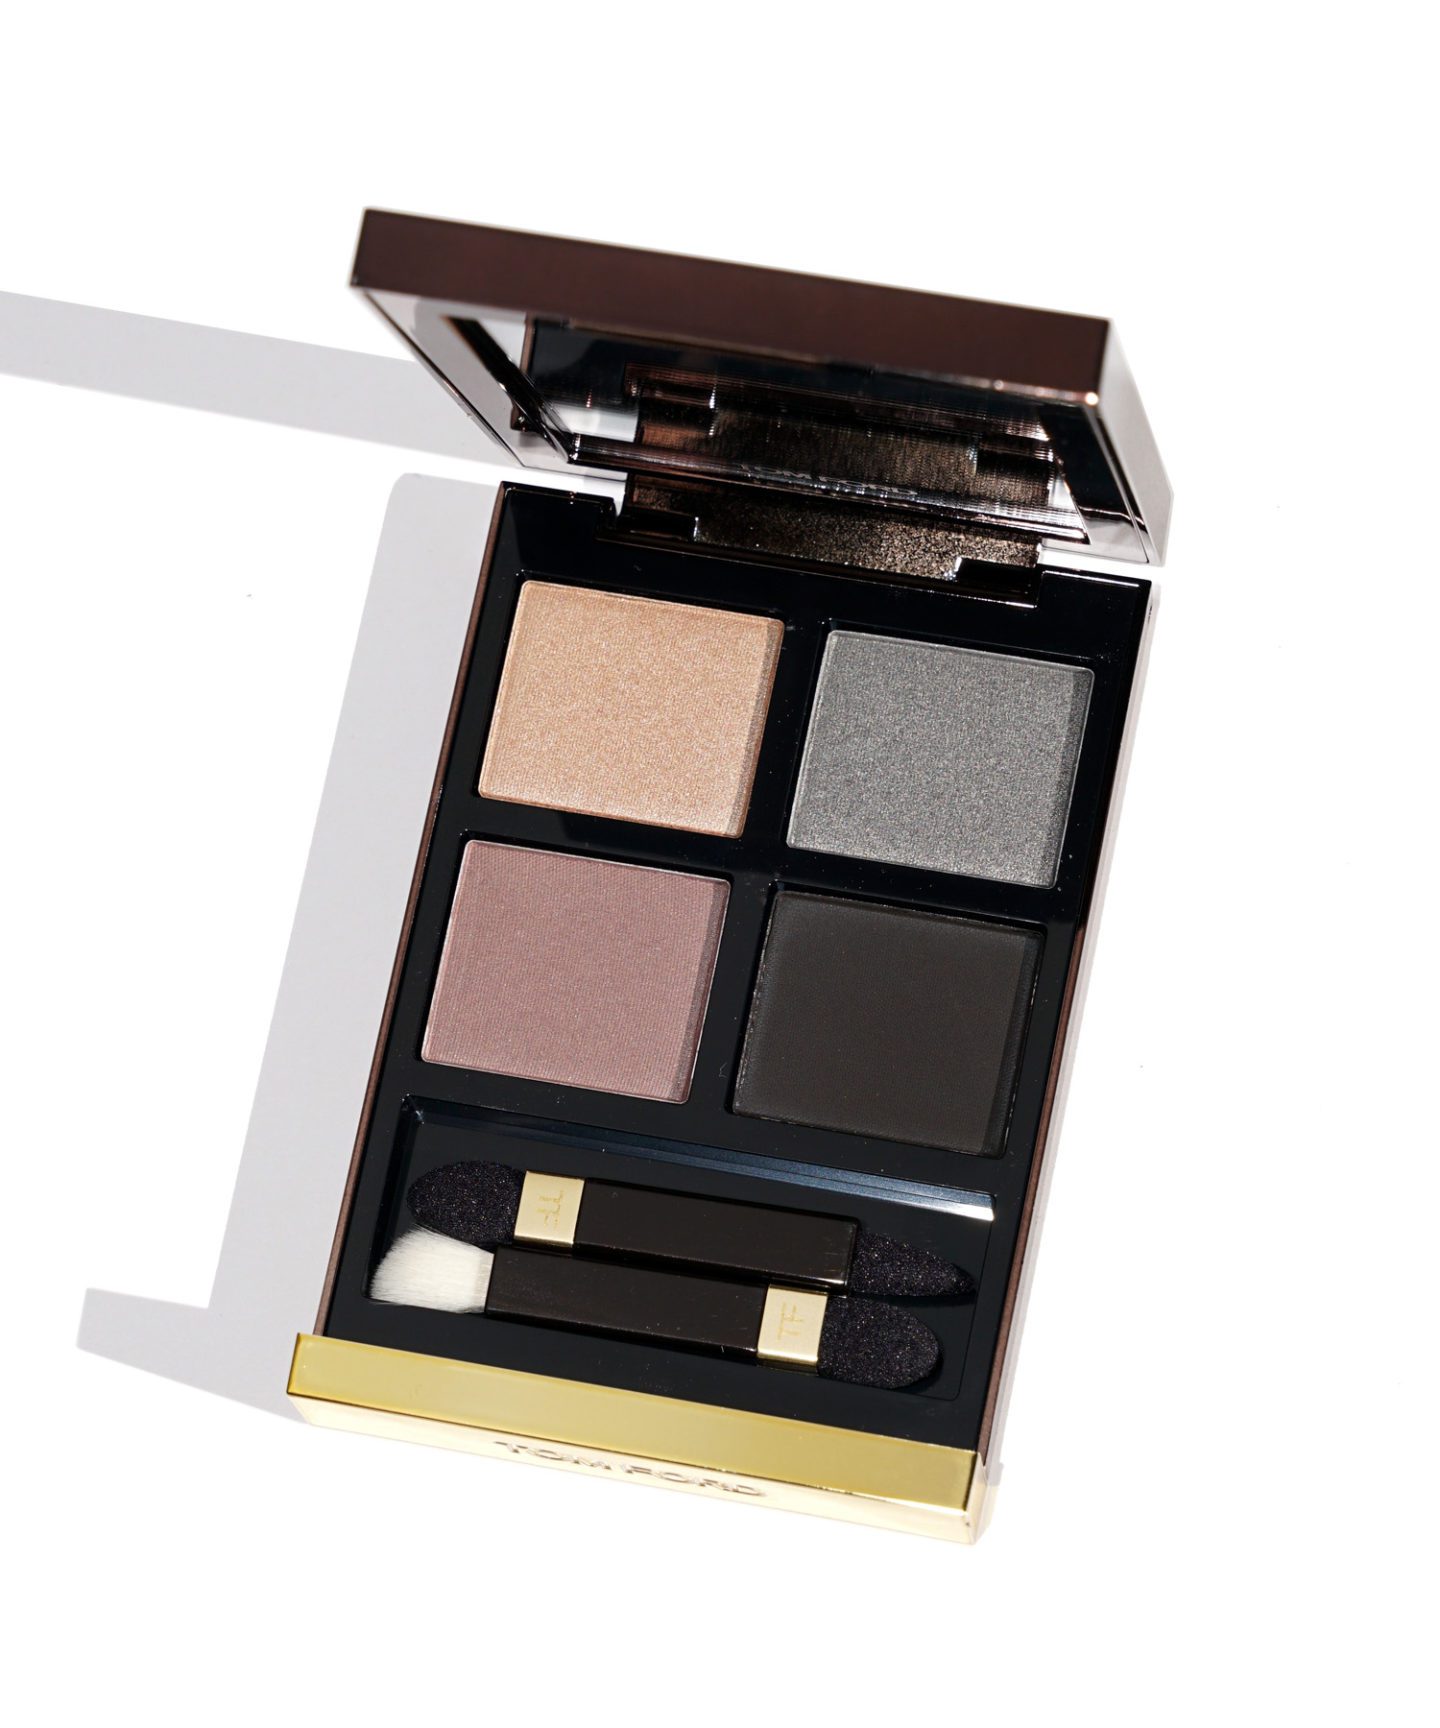 Tom Ford Supernouveau Eyeshadow Quad Review | The Beauty Look Book